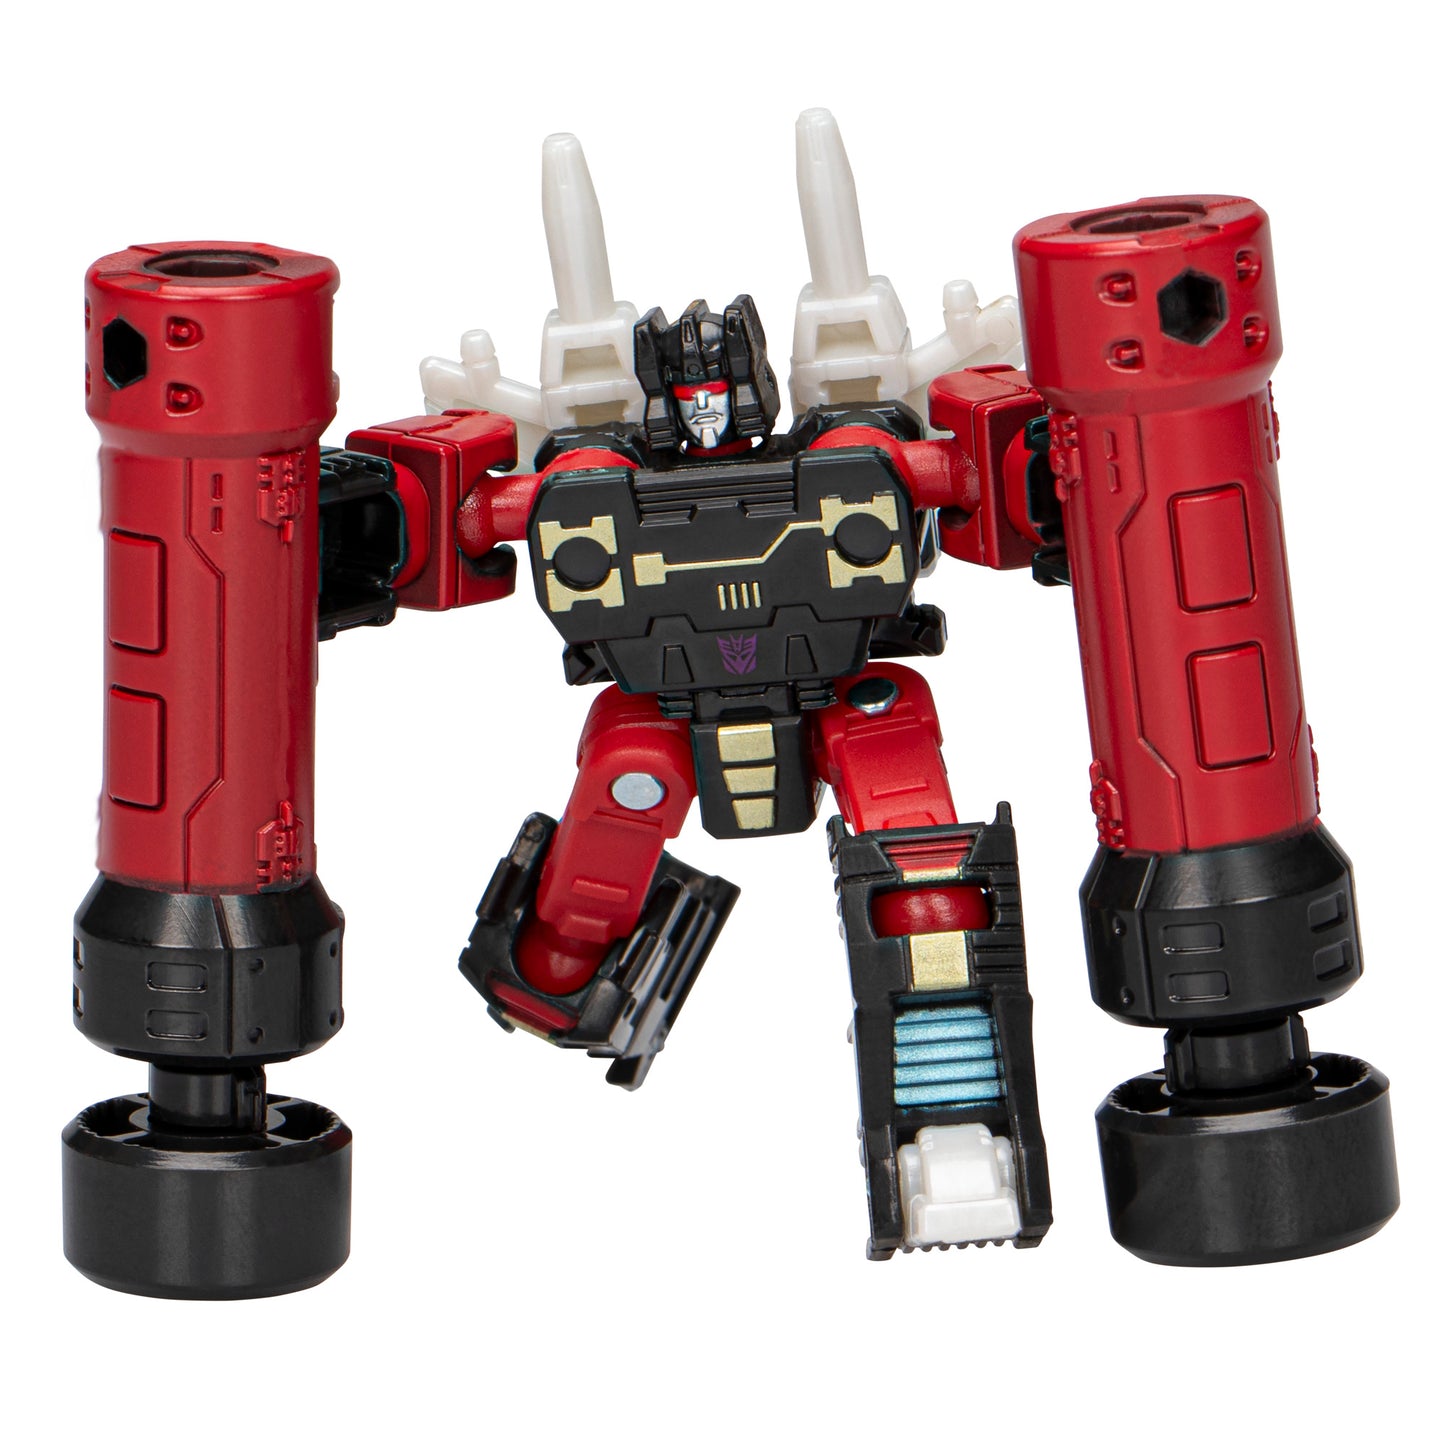 Transformers Toys Studio Series The Transformers: The Movie Decepticon Frenzy (Red) Toy, 3.5-inch, Action Figures For Boys And Girls Ages 8 and Up